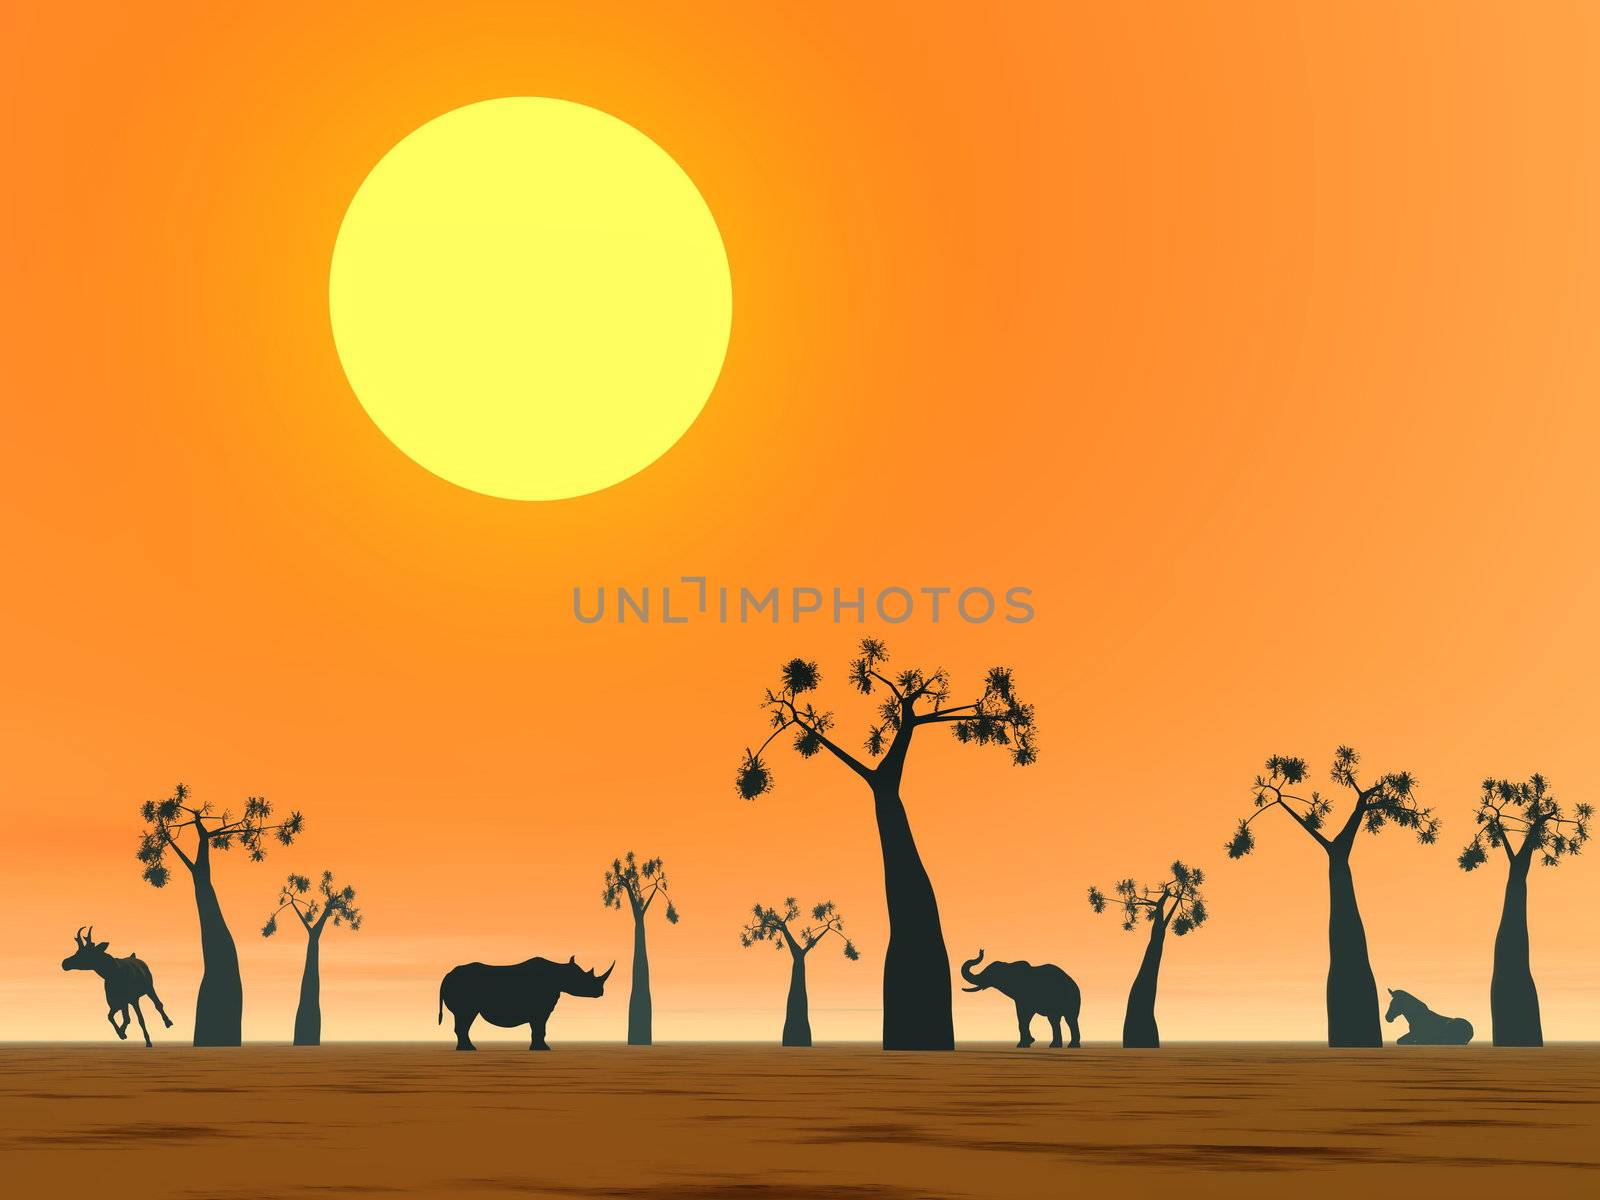 Shadows of animals in the savannah next to baobabs by sunset